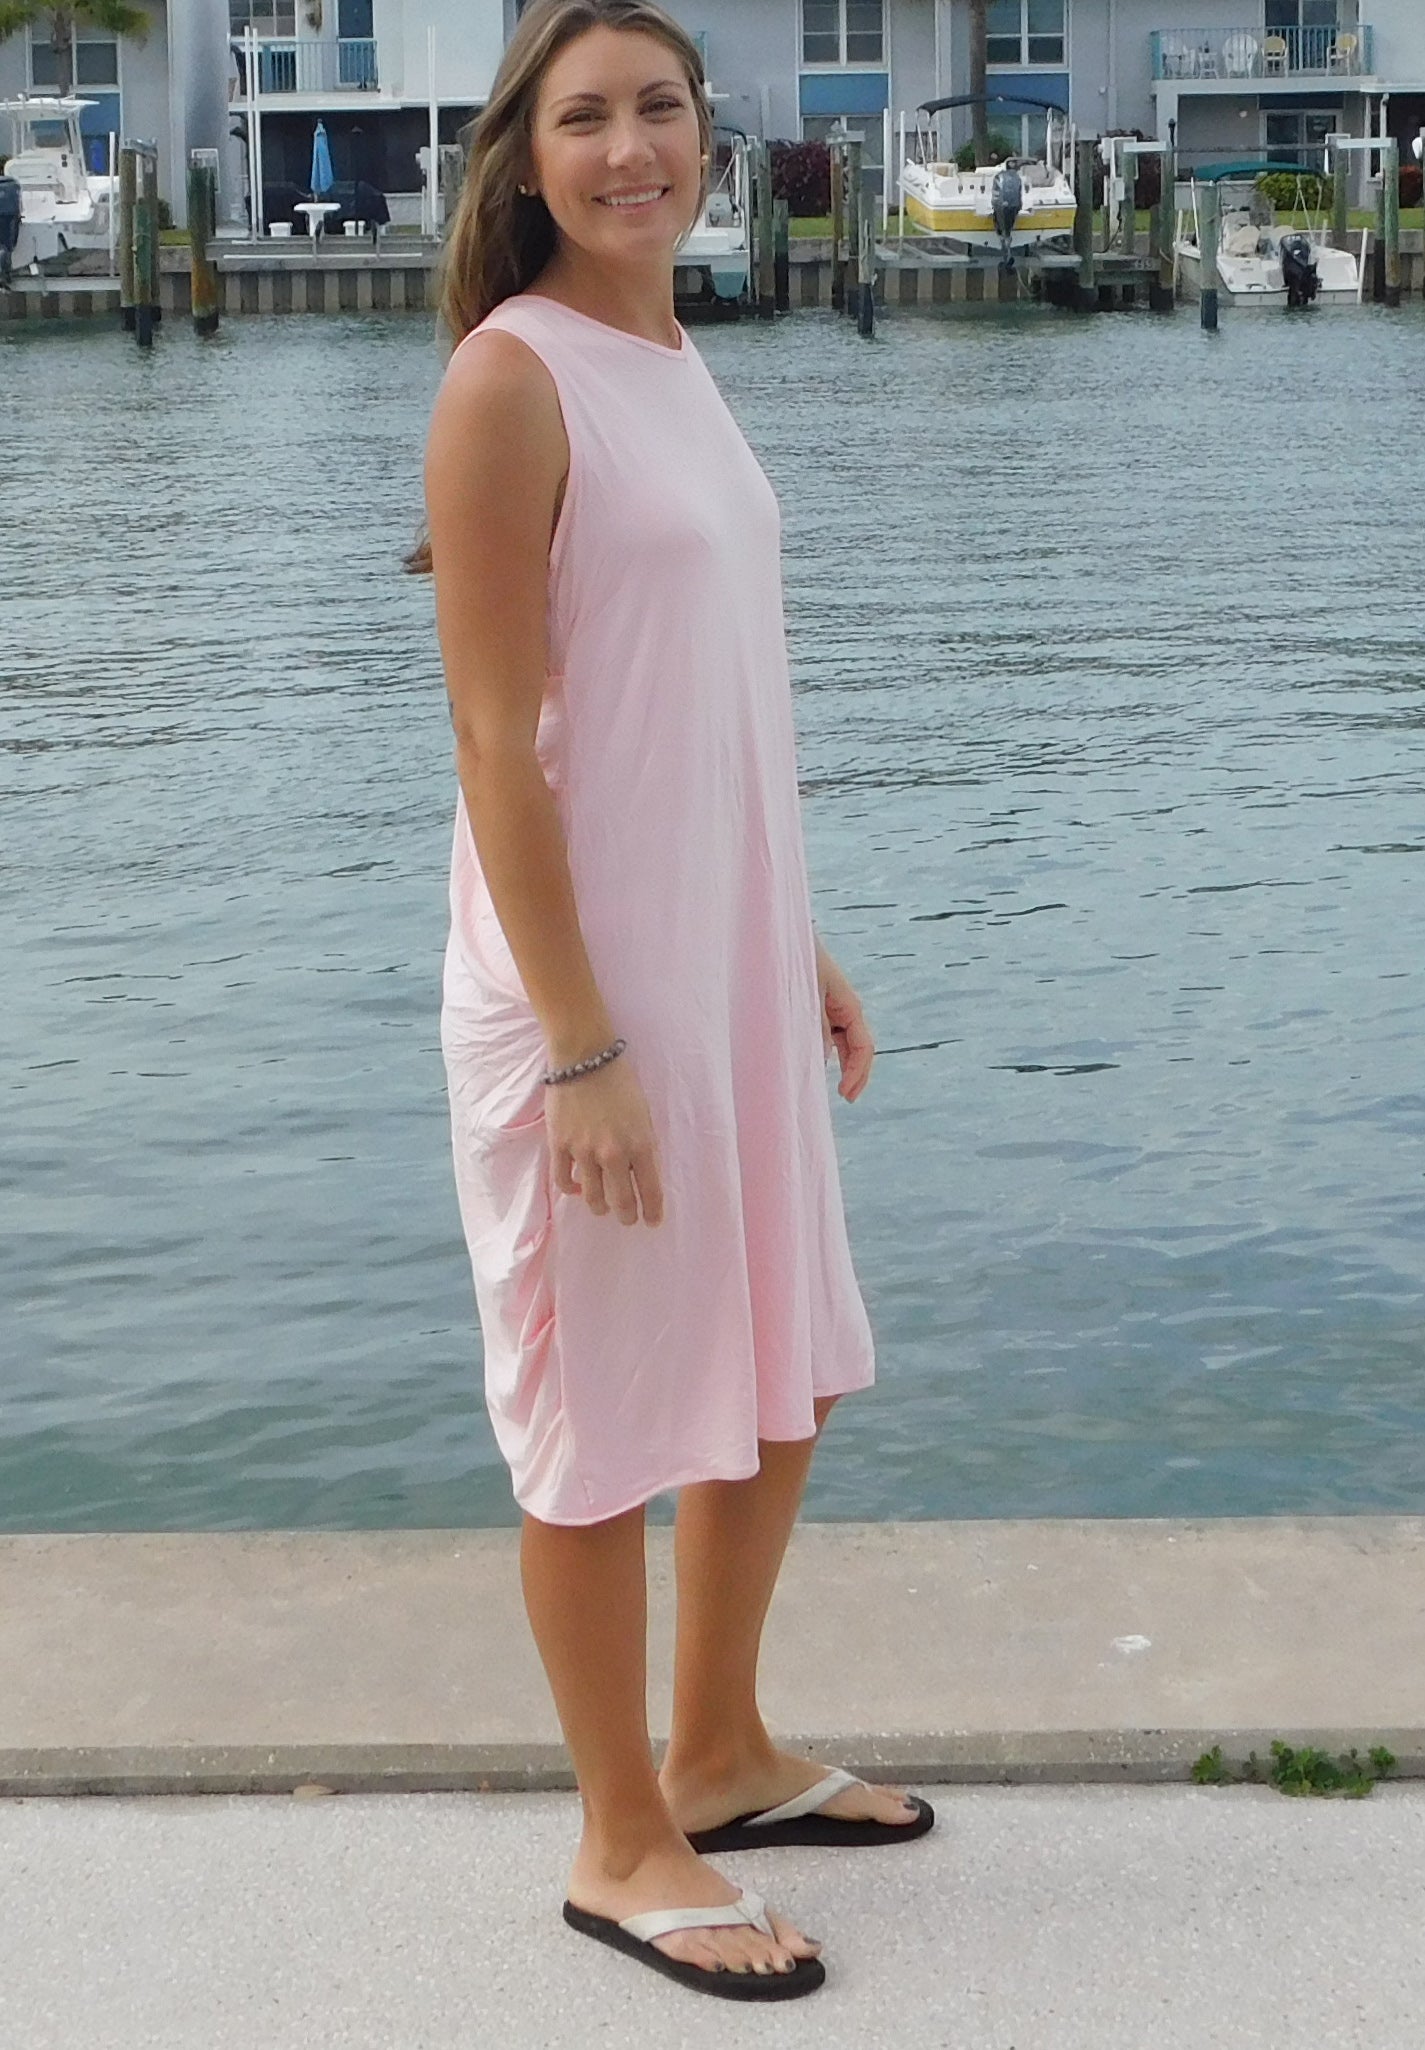 Yogaz New Eco Friendly Bamboo Pink Swimsuit Cover-Sun Dress is called "Wave". It's super cute, elegant and so comfortable.